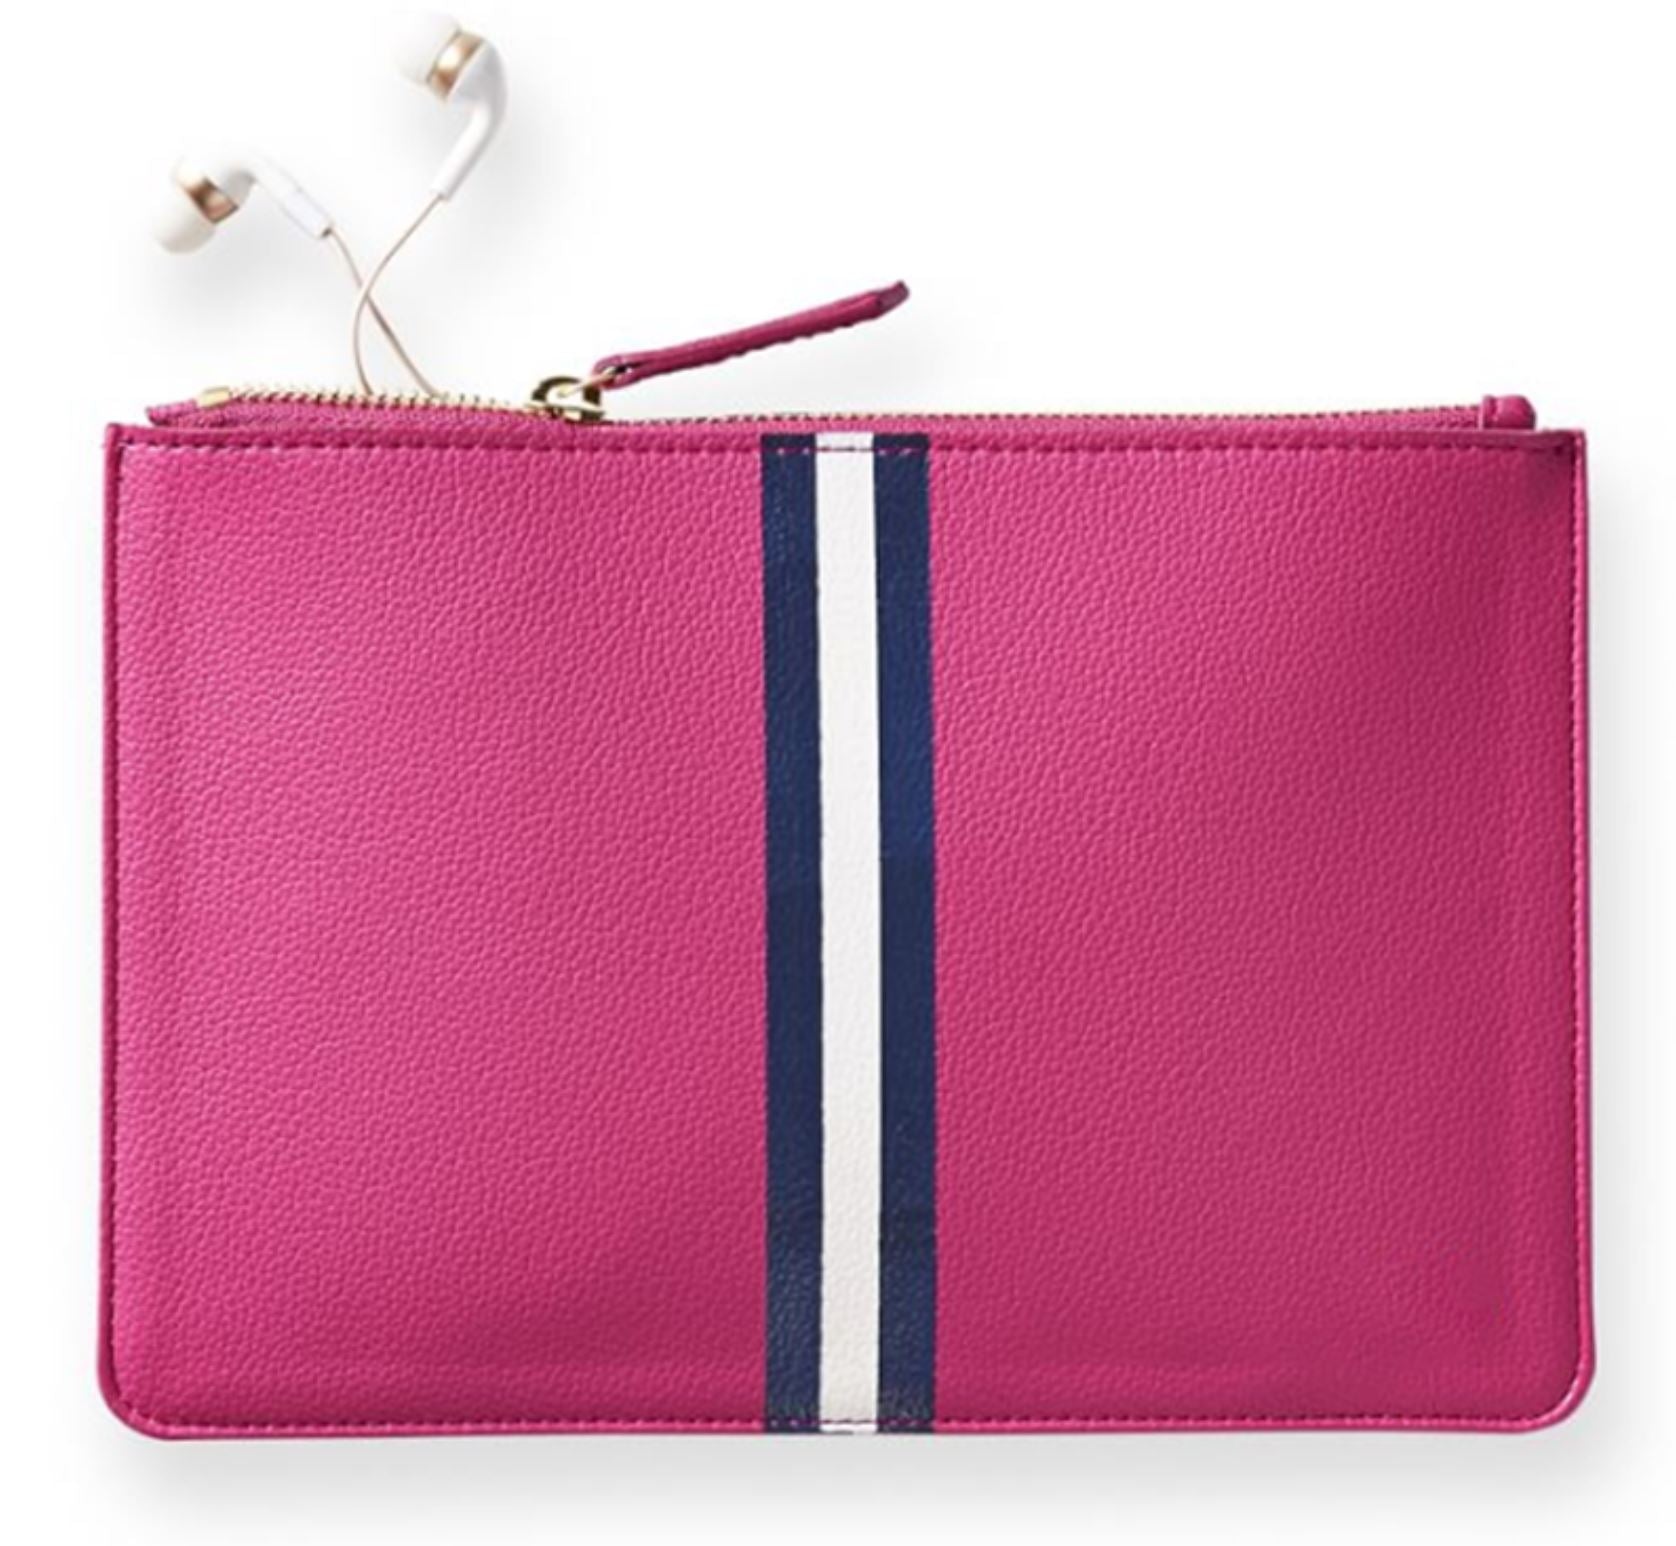 Sloane Leather Clutch - Pink